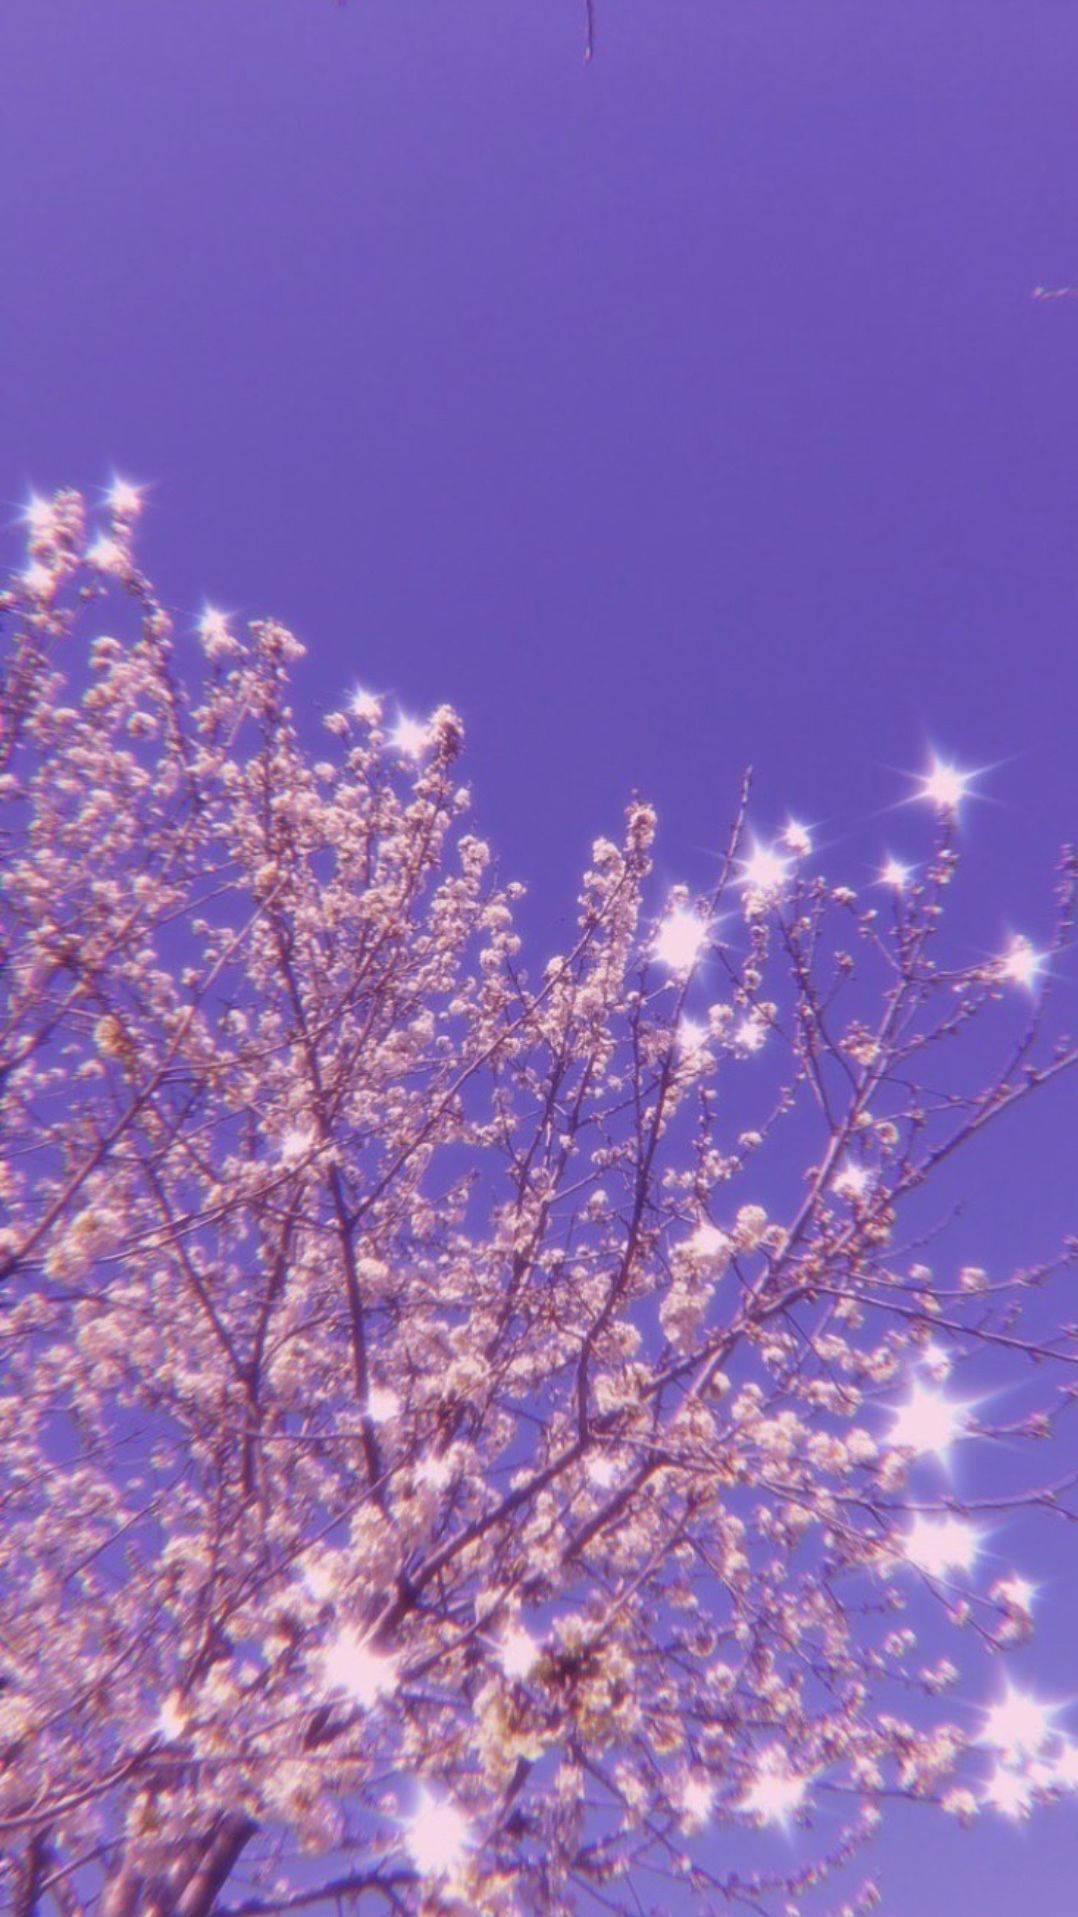 Sparkly Cherry Blossoms With Light Purple Sky Wallpaper